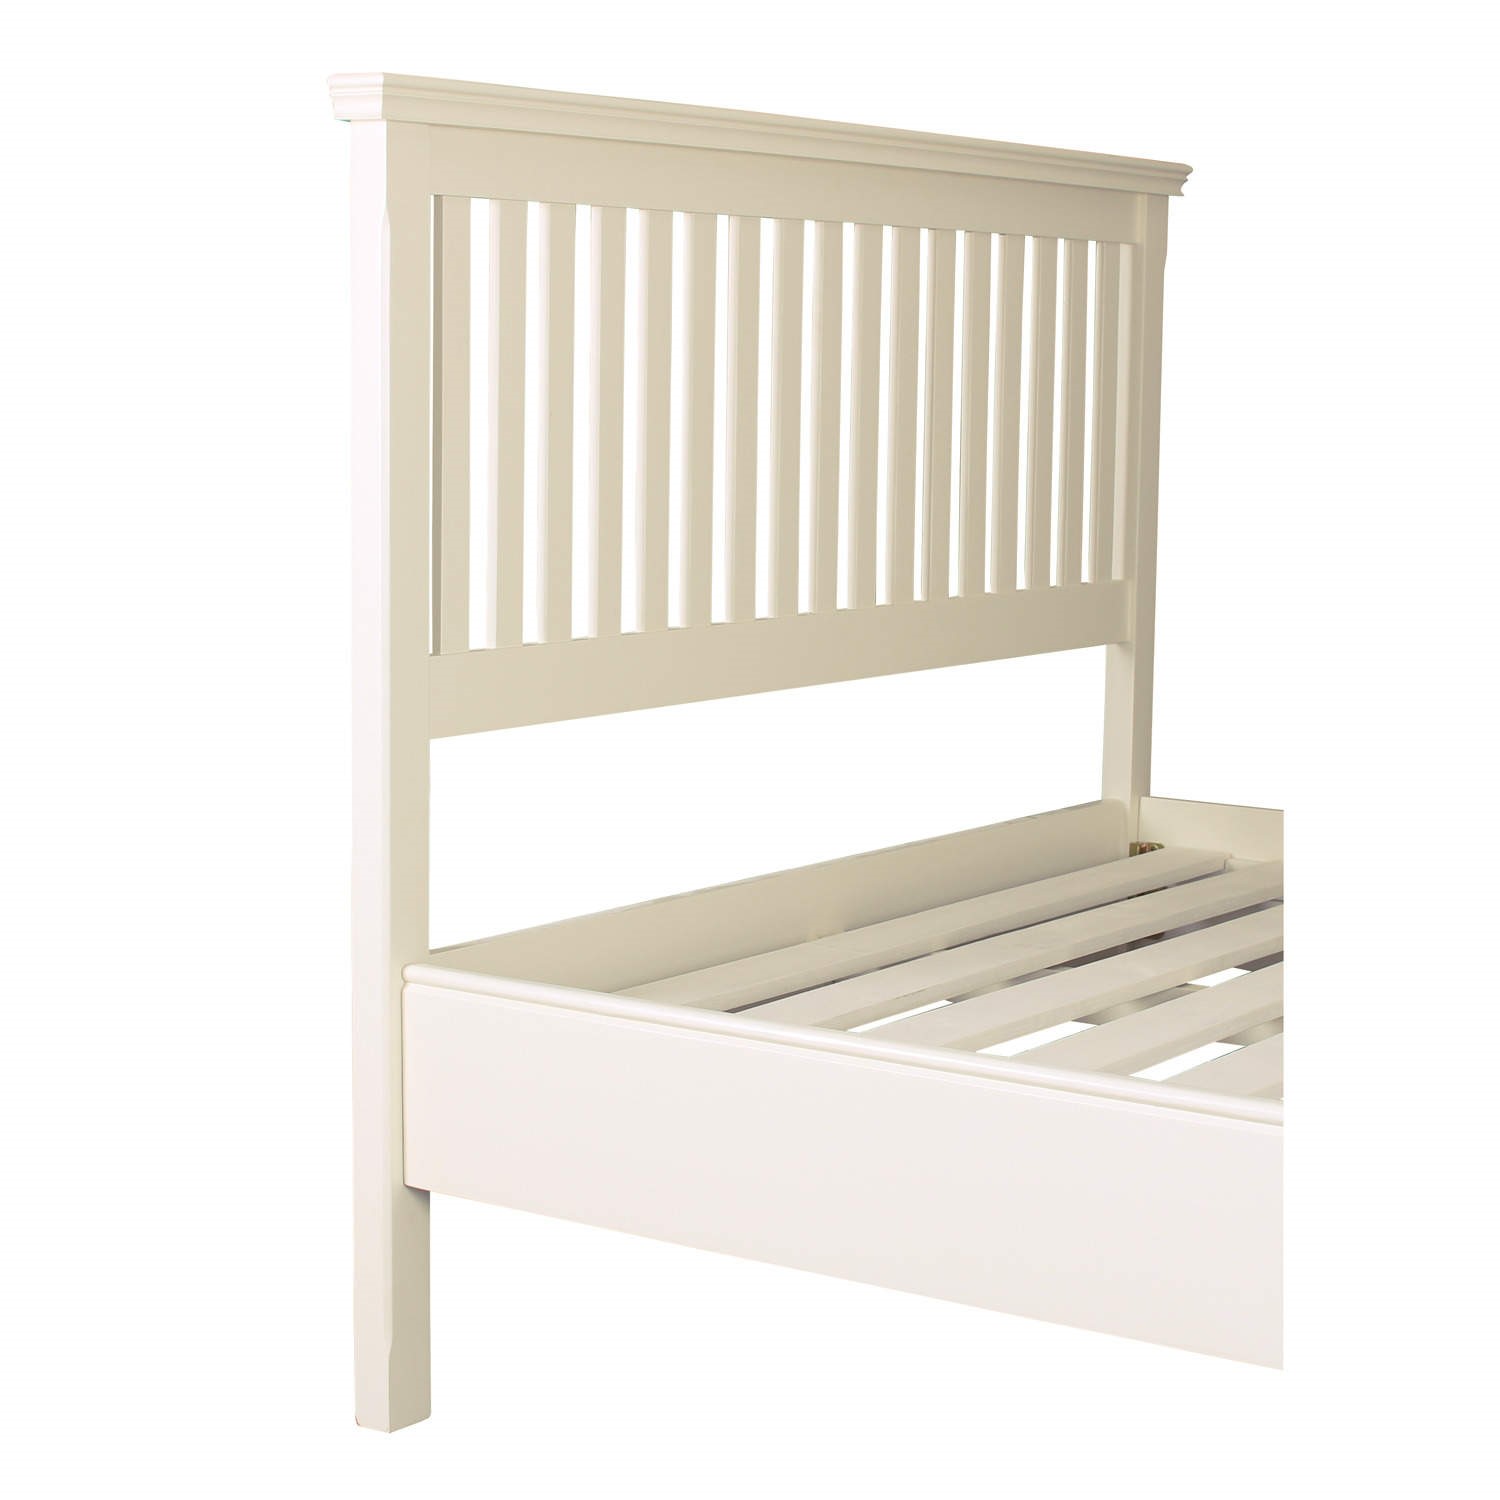 Savannah Double Bed in Ivory/Cream - Furniture123